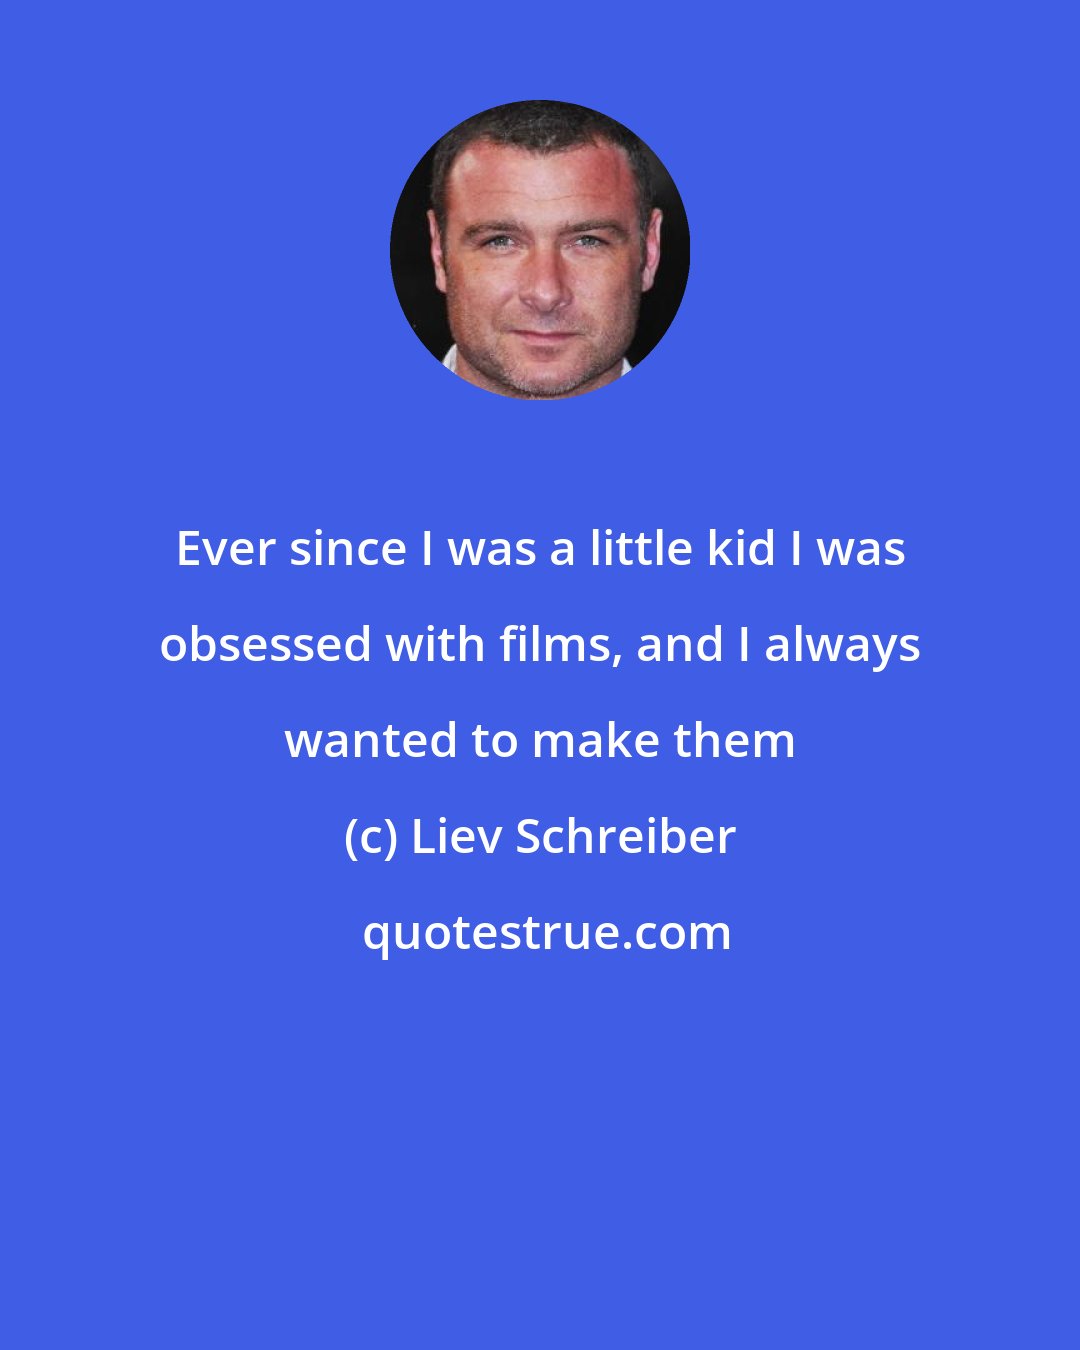 Liev Schreiber: Ever since I was a little kid I was obsessed with films, and I always wanted to make them